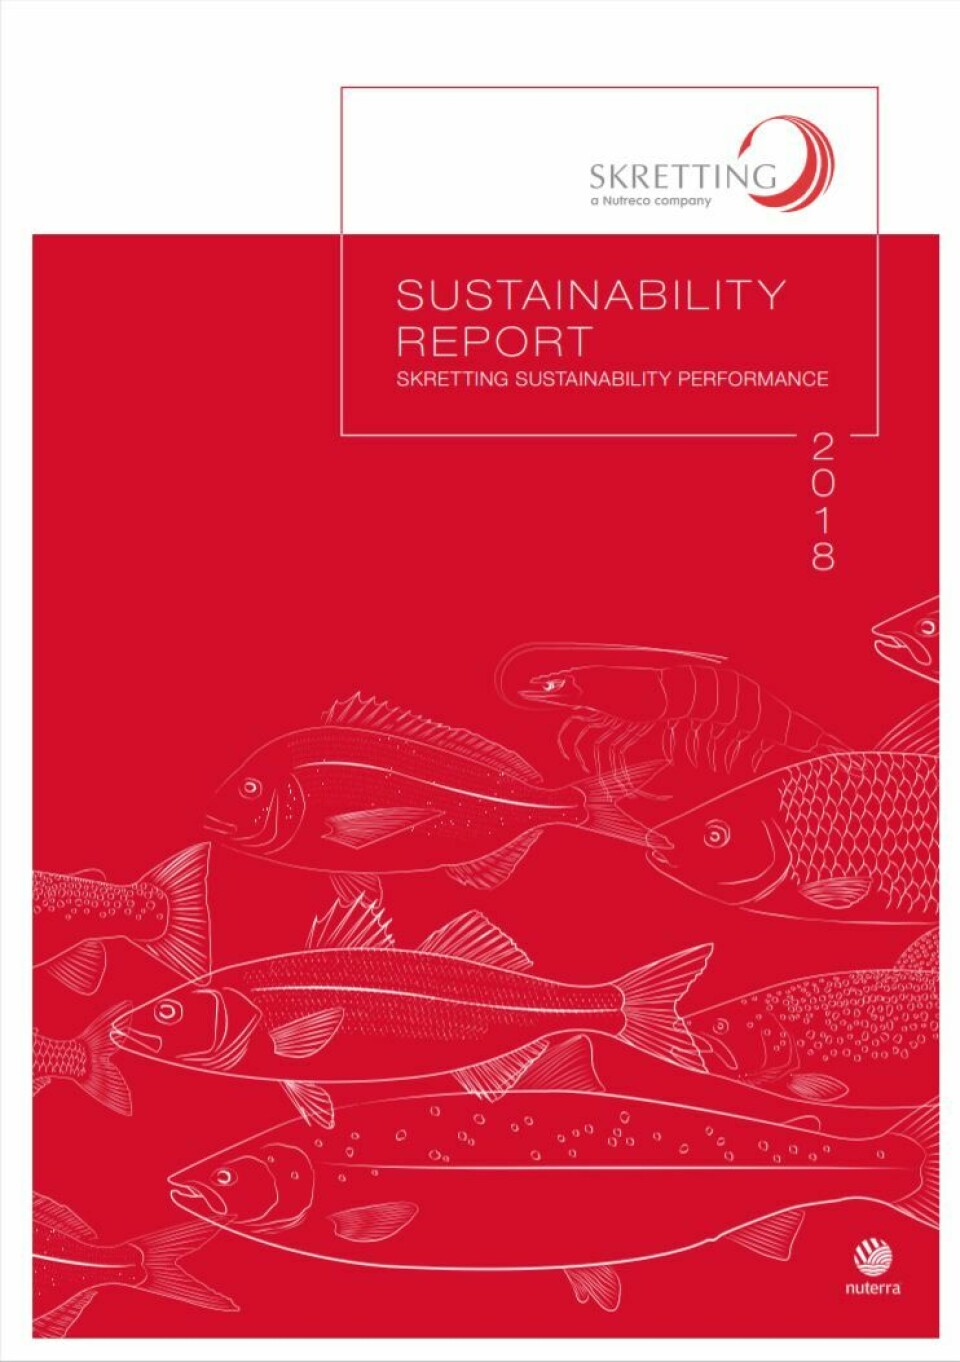 Skretting has published its Sustainability Report for 2018.